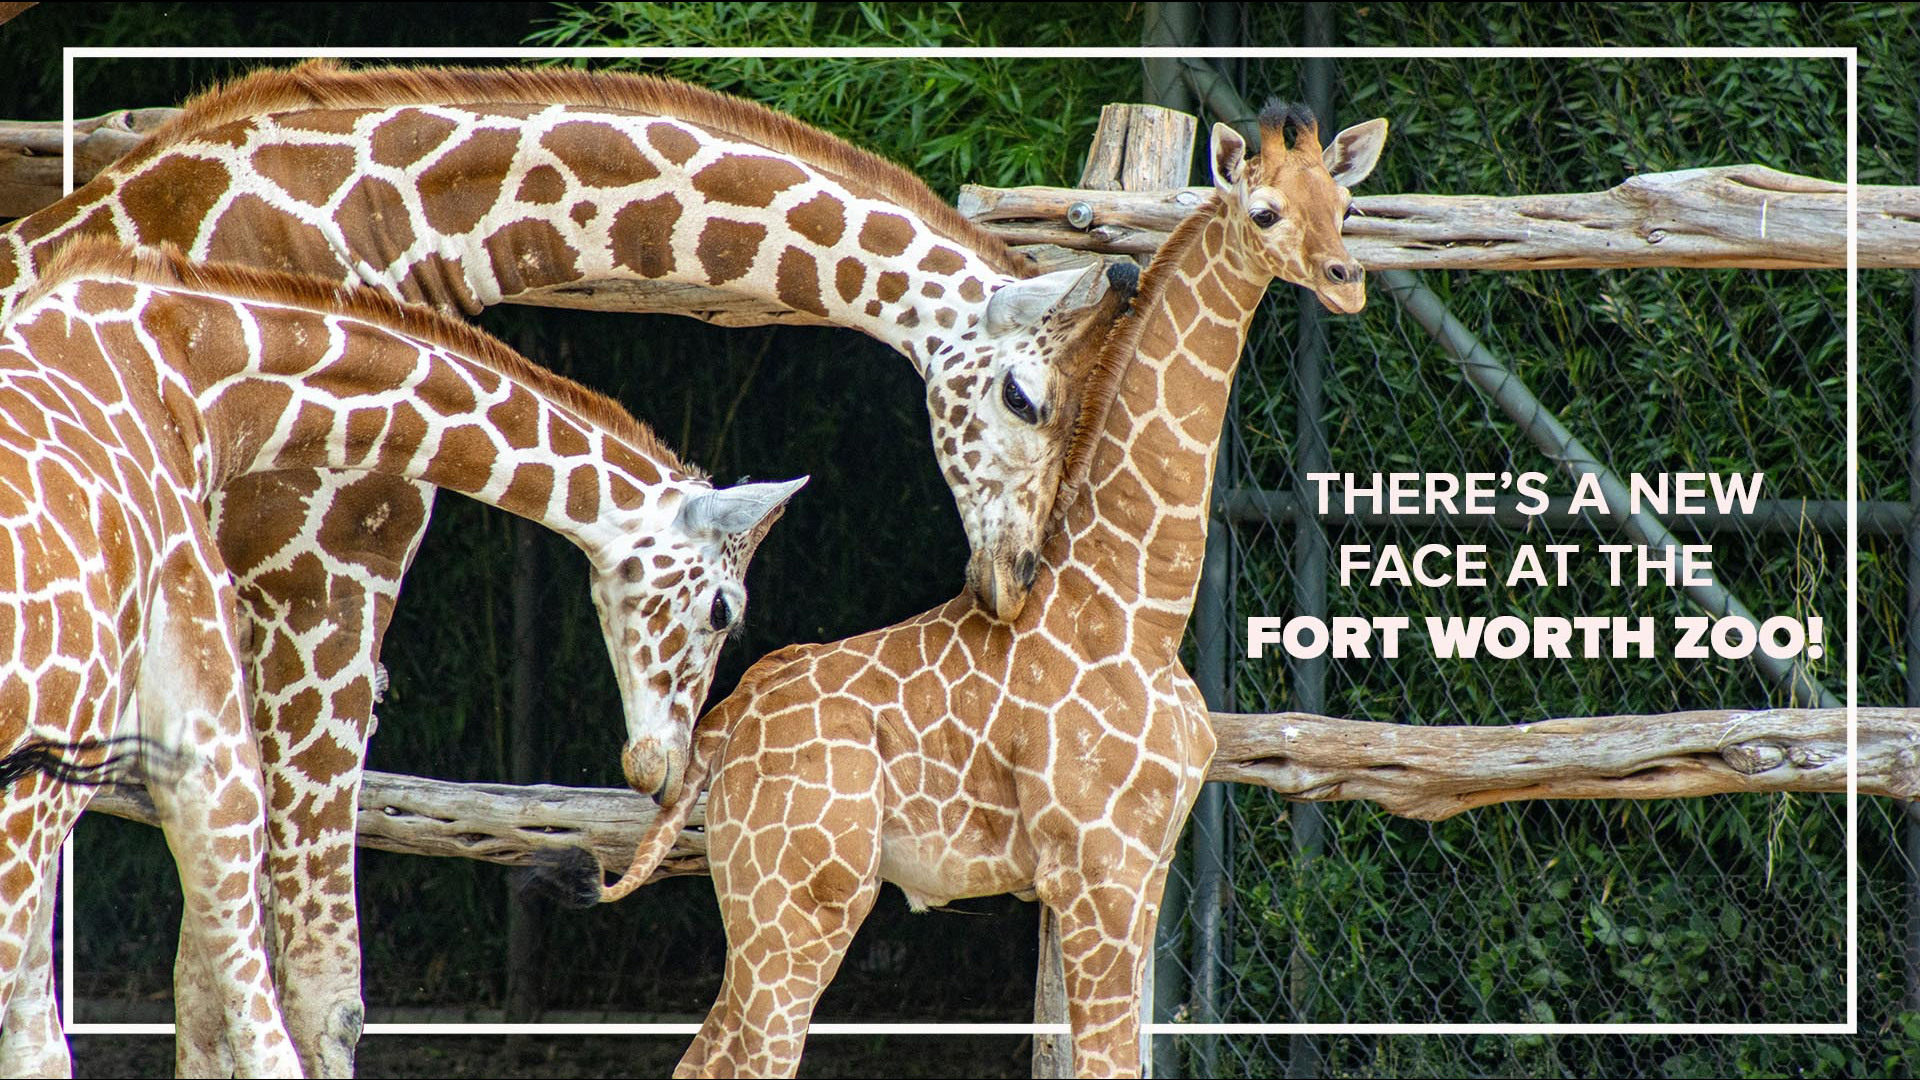 After nearly 8000 votes, the public has chosen a name for the newest giraffe at the Fort Worth Zoo. Meet Lucchese!